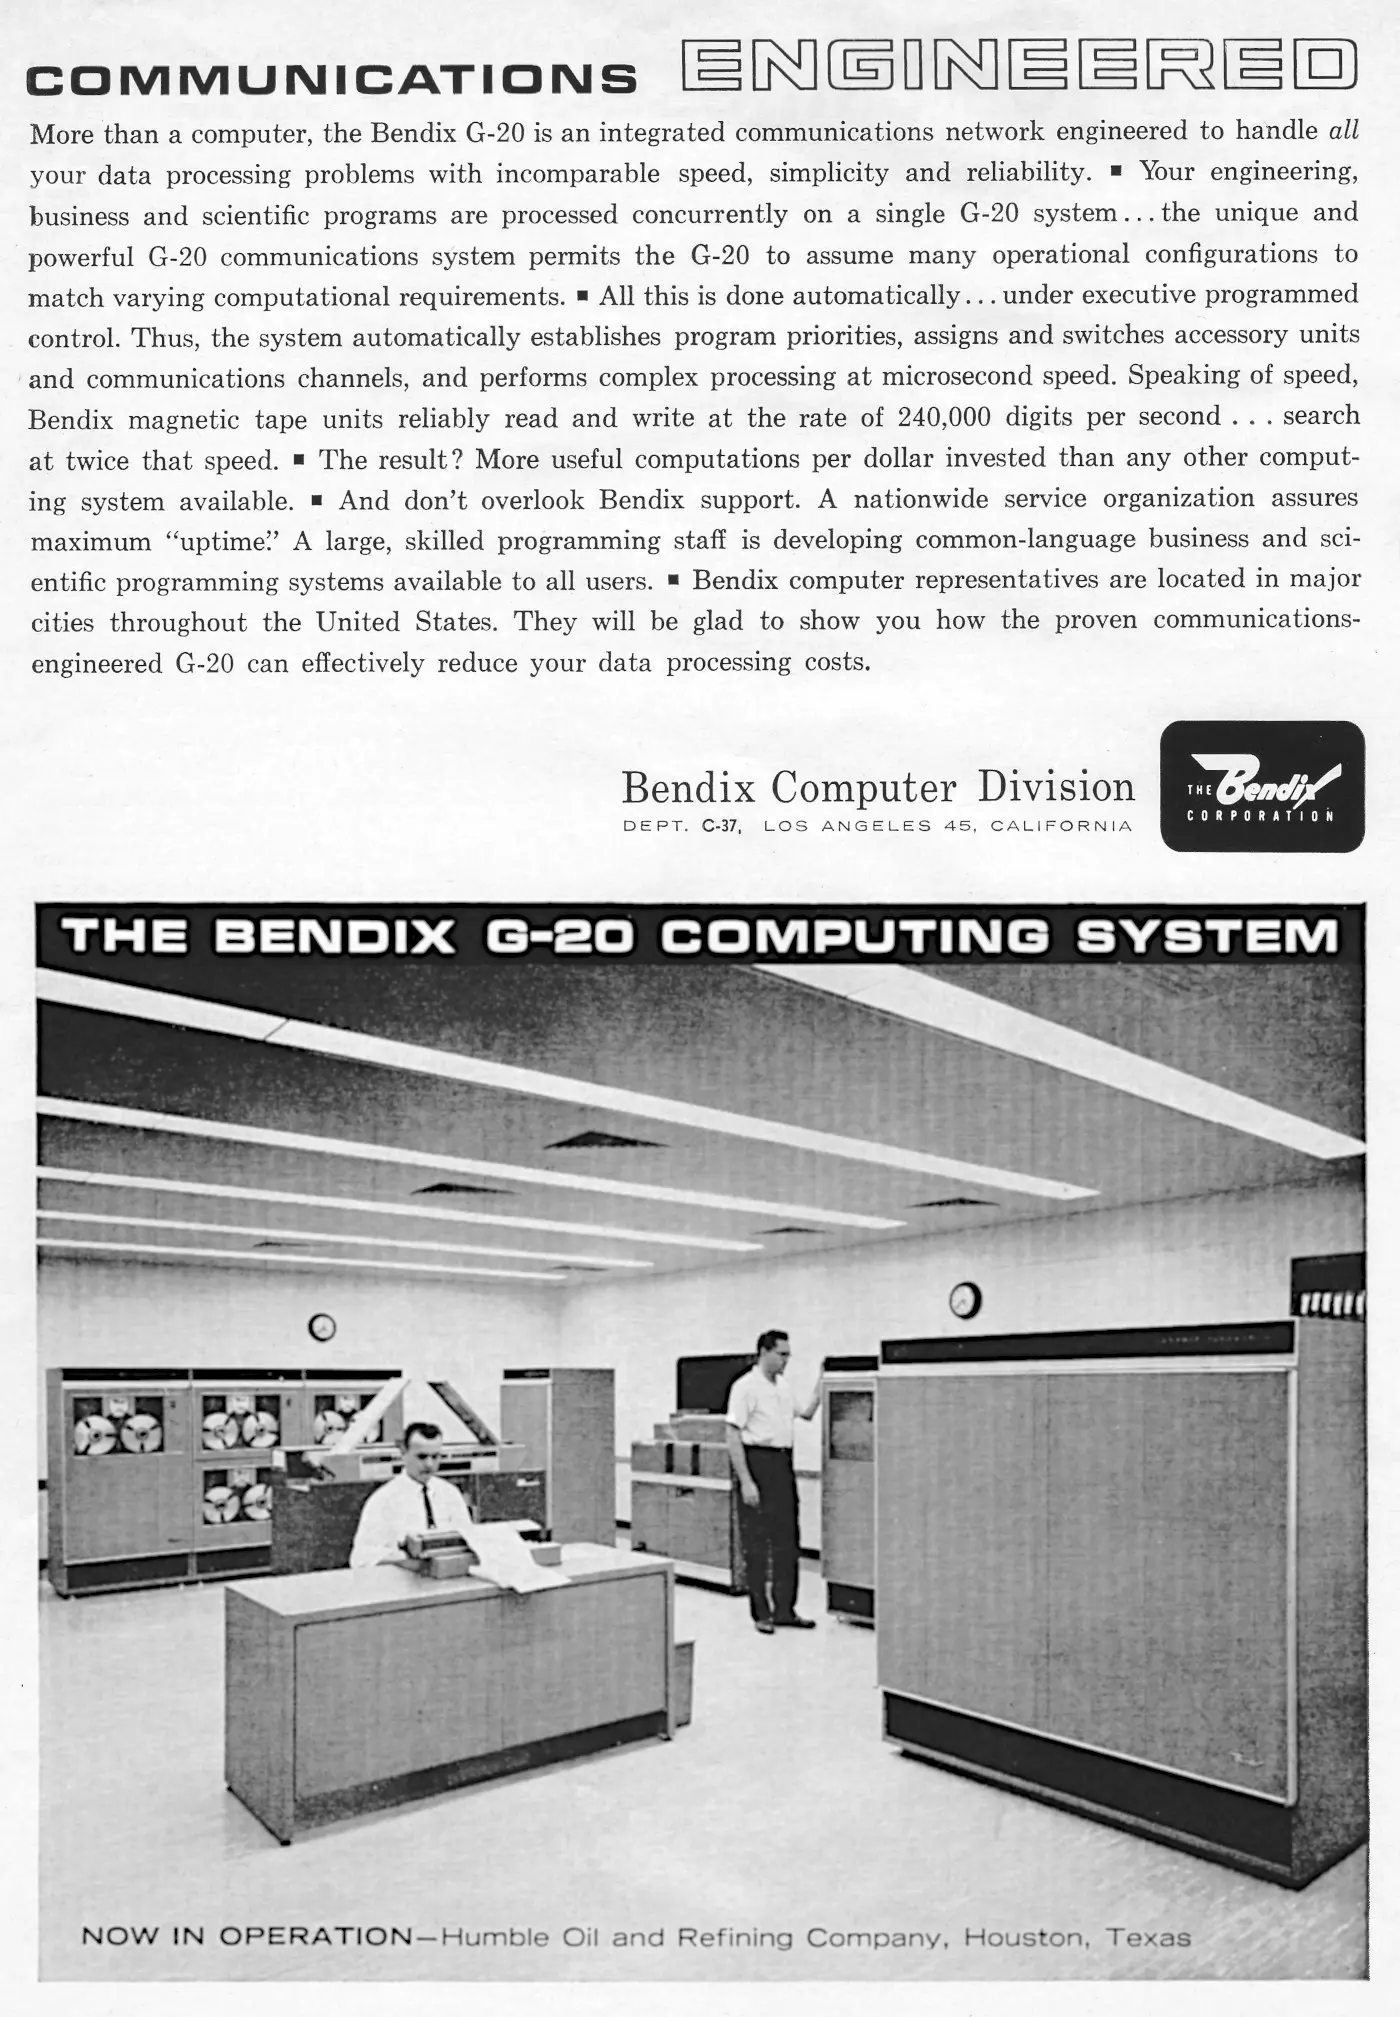 Bendix Advert: Communications Engineered: The Bendix G-20 Computer System, from Unknown, 1962